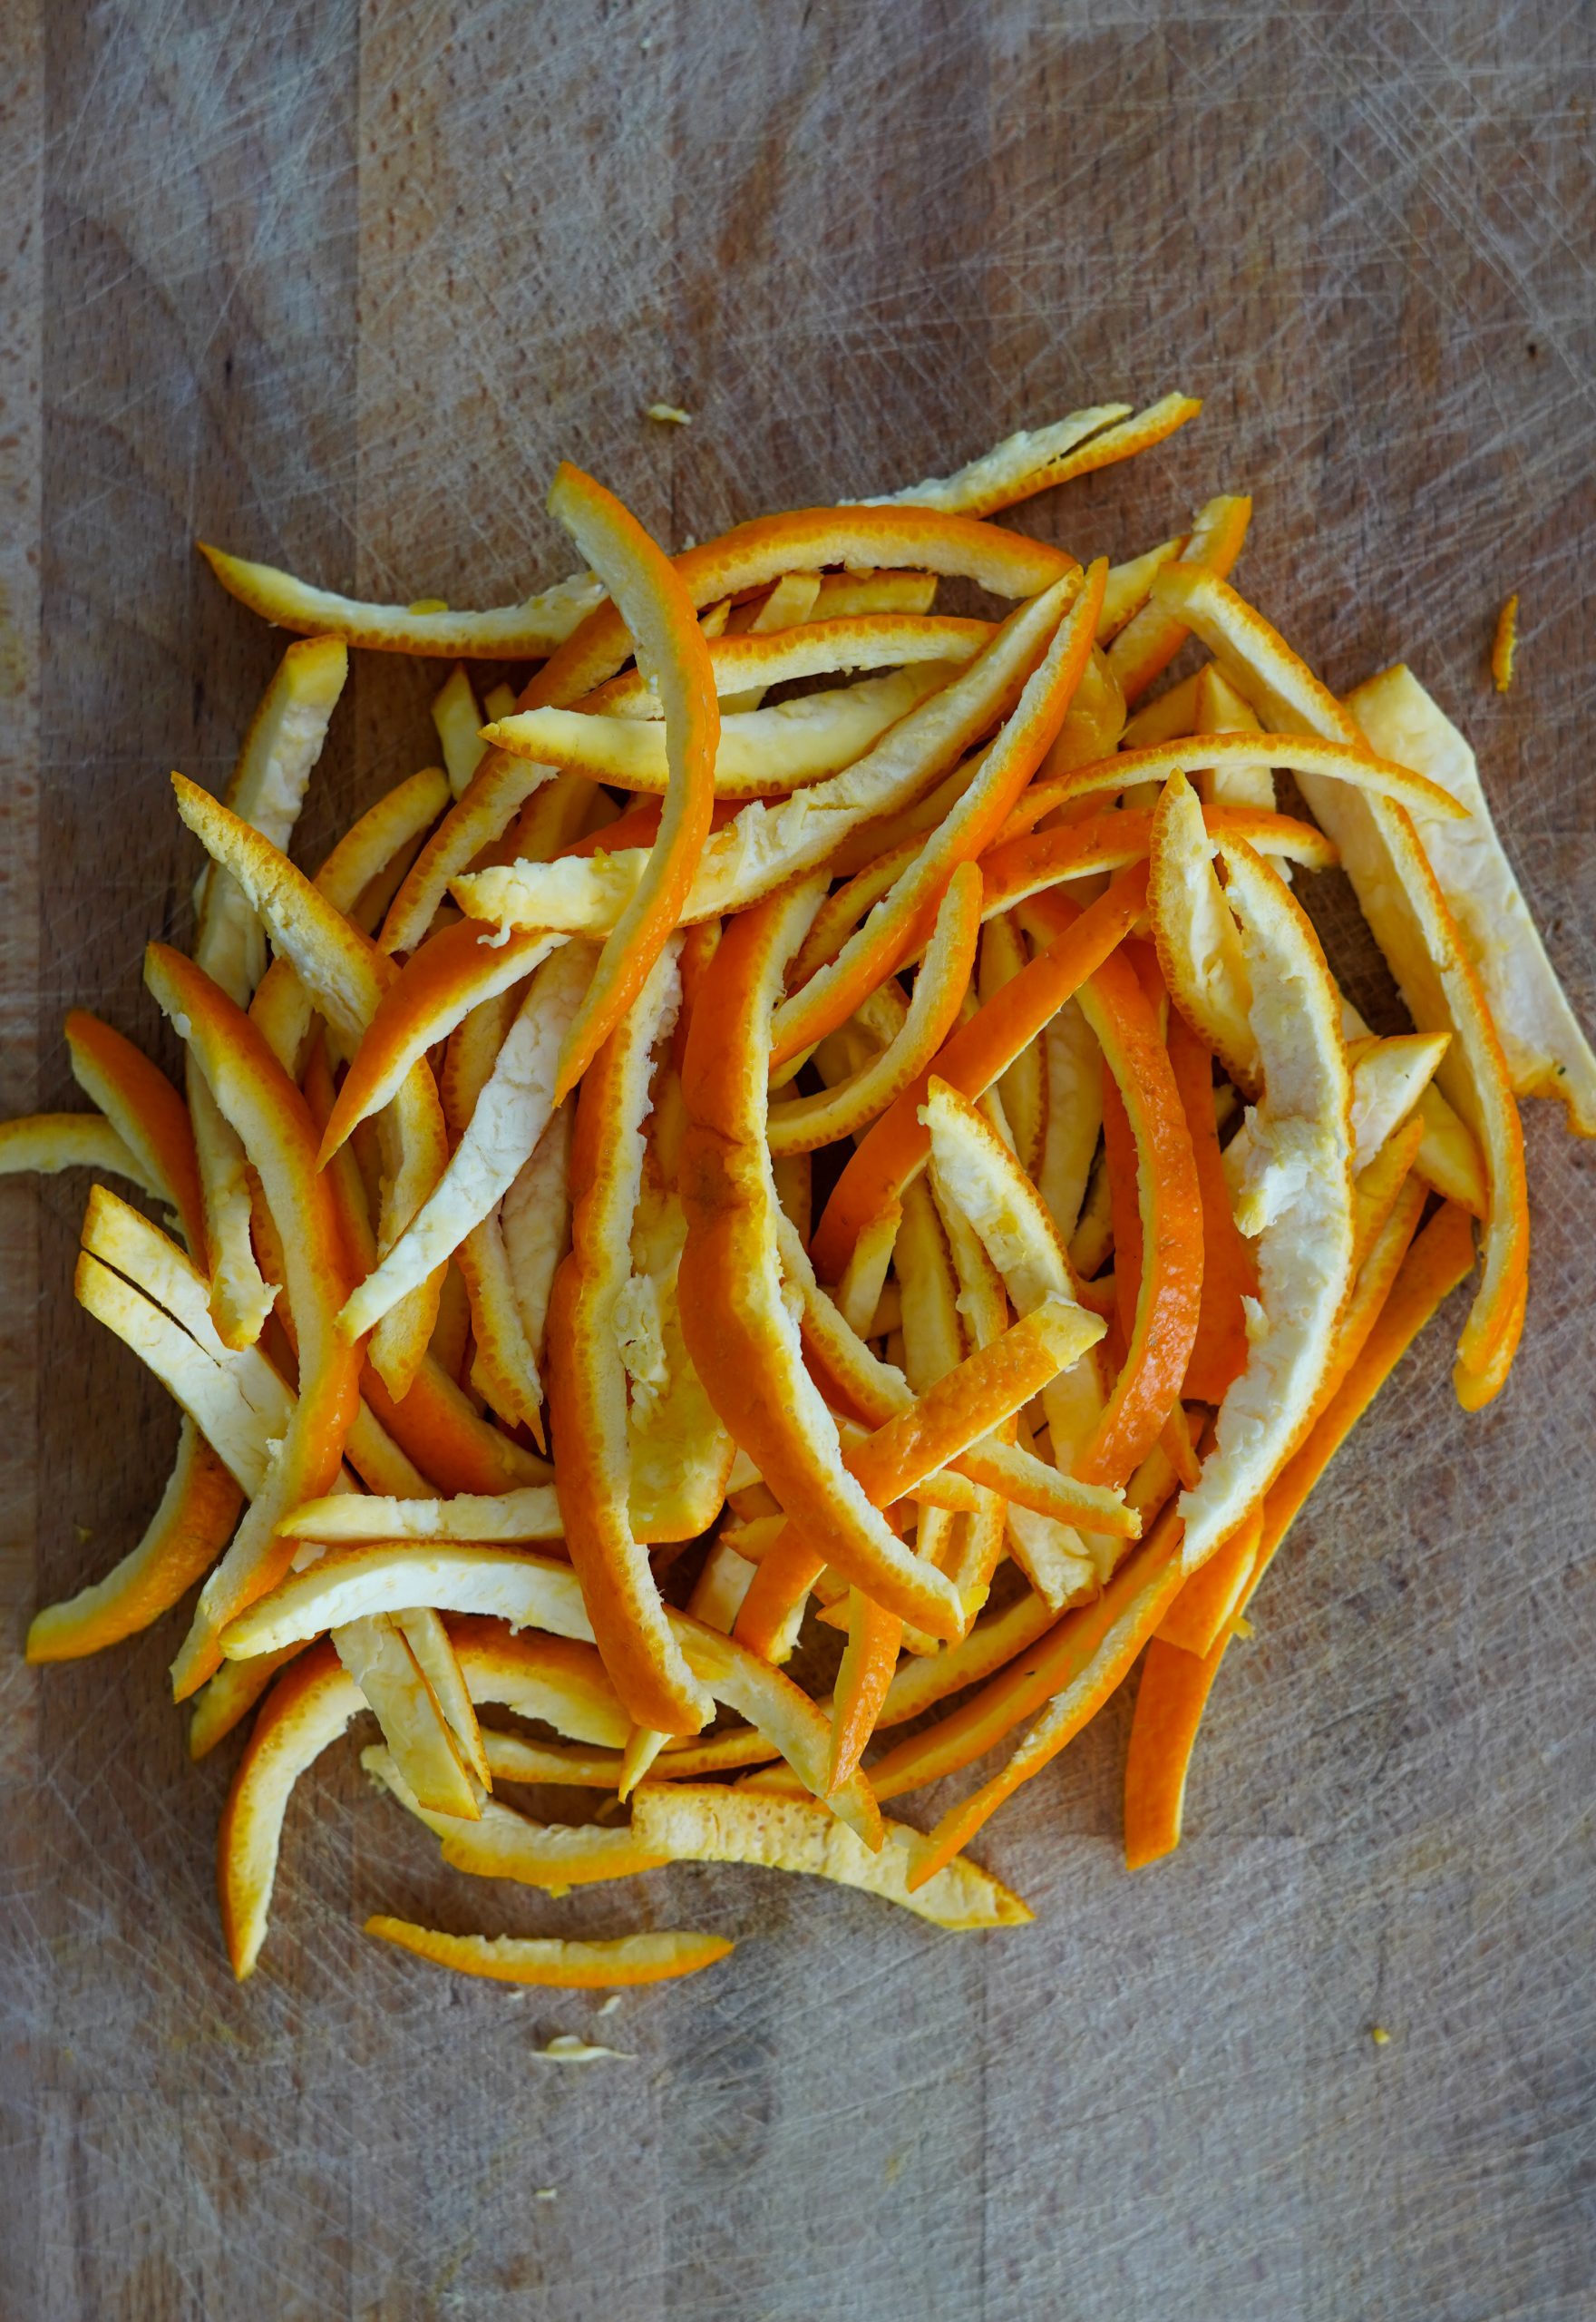 Don’t throw away the orange peel!! Add salt! I don’t buy from the market anymore!